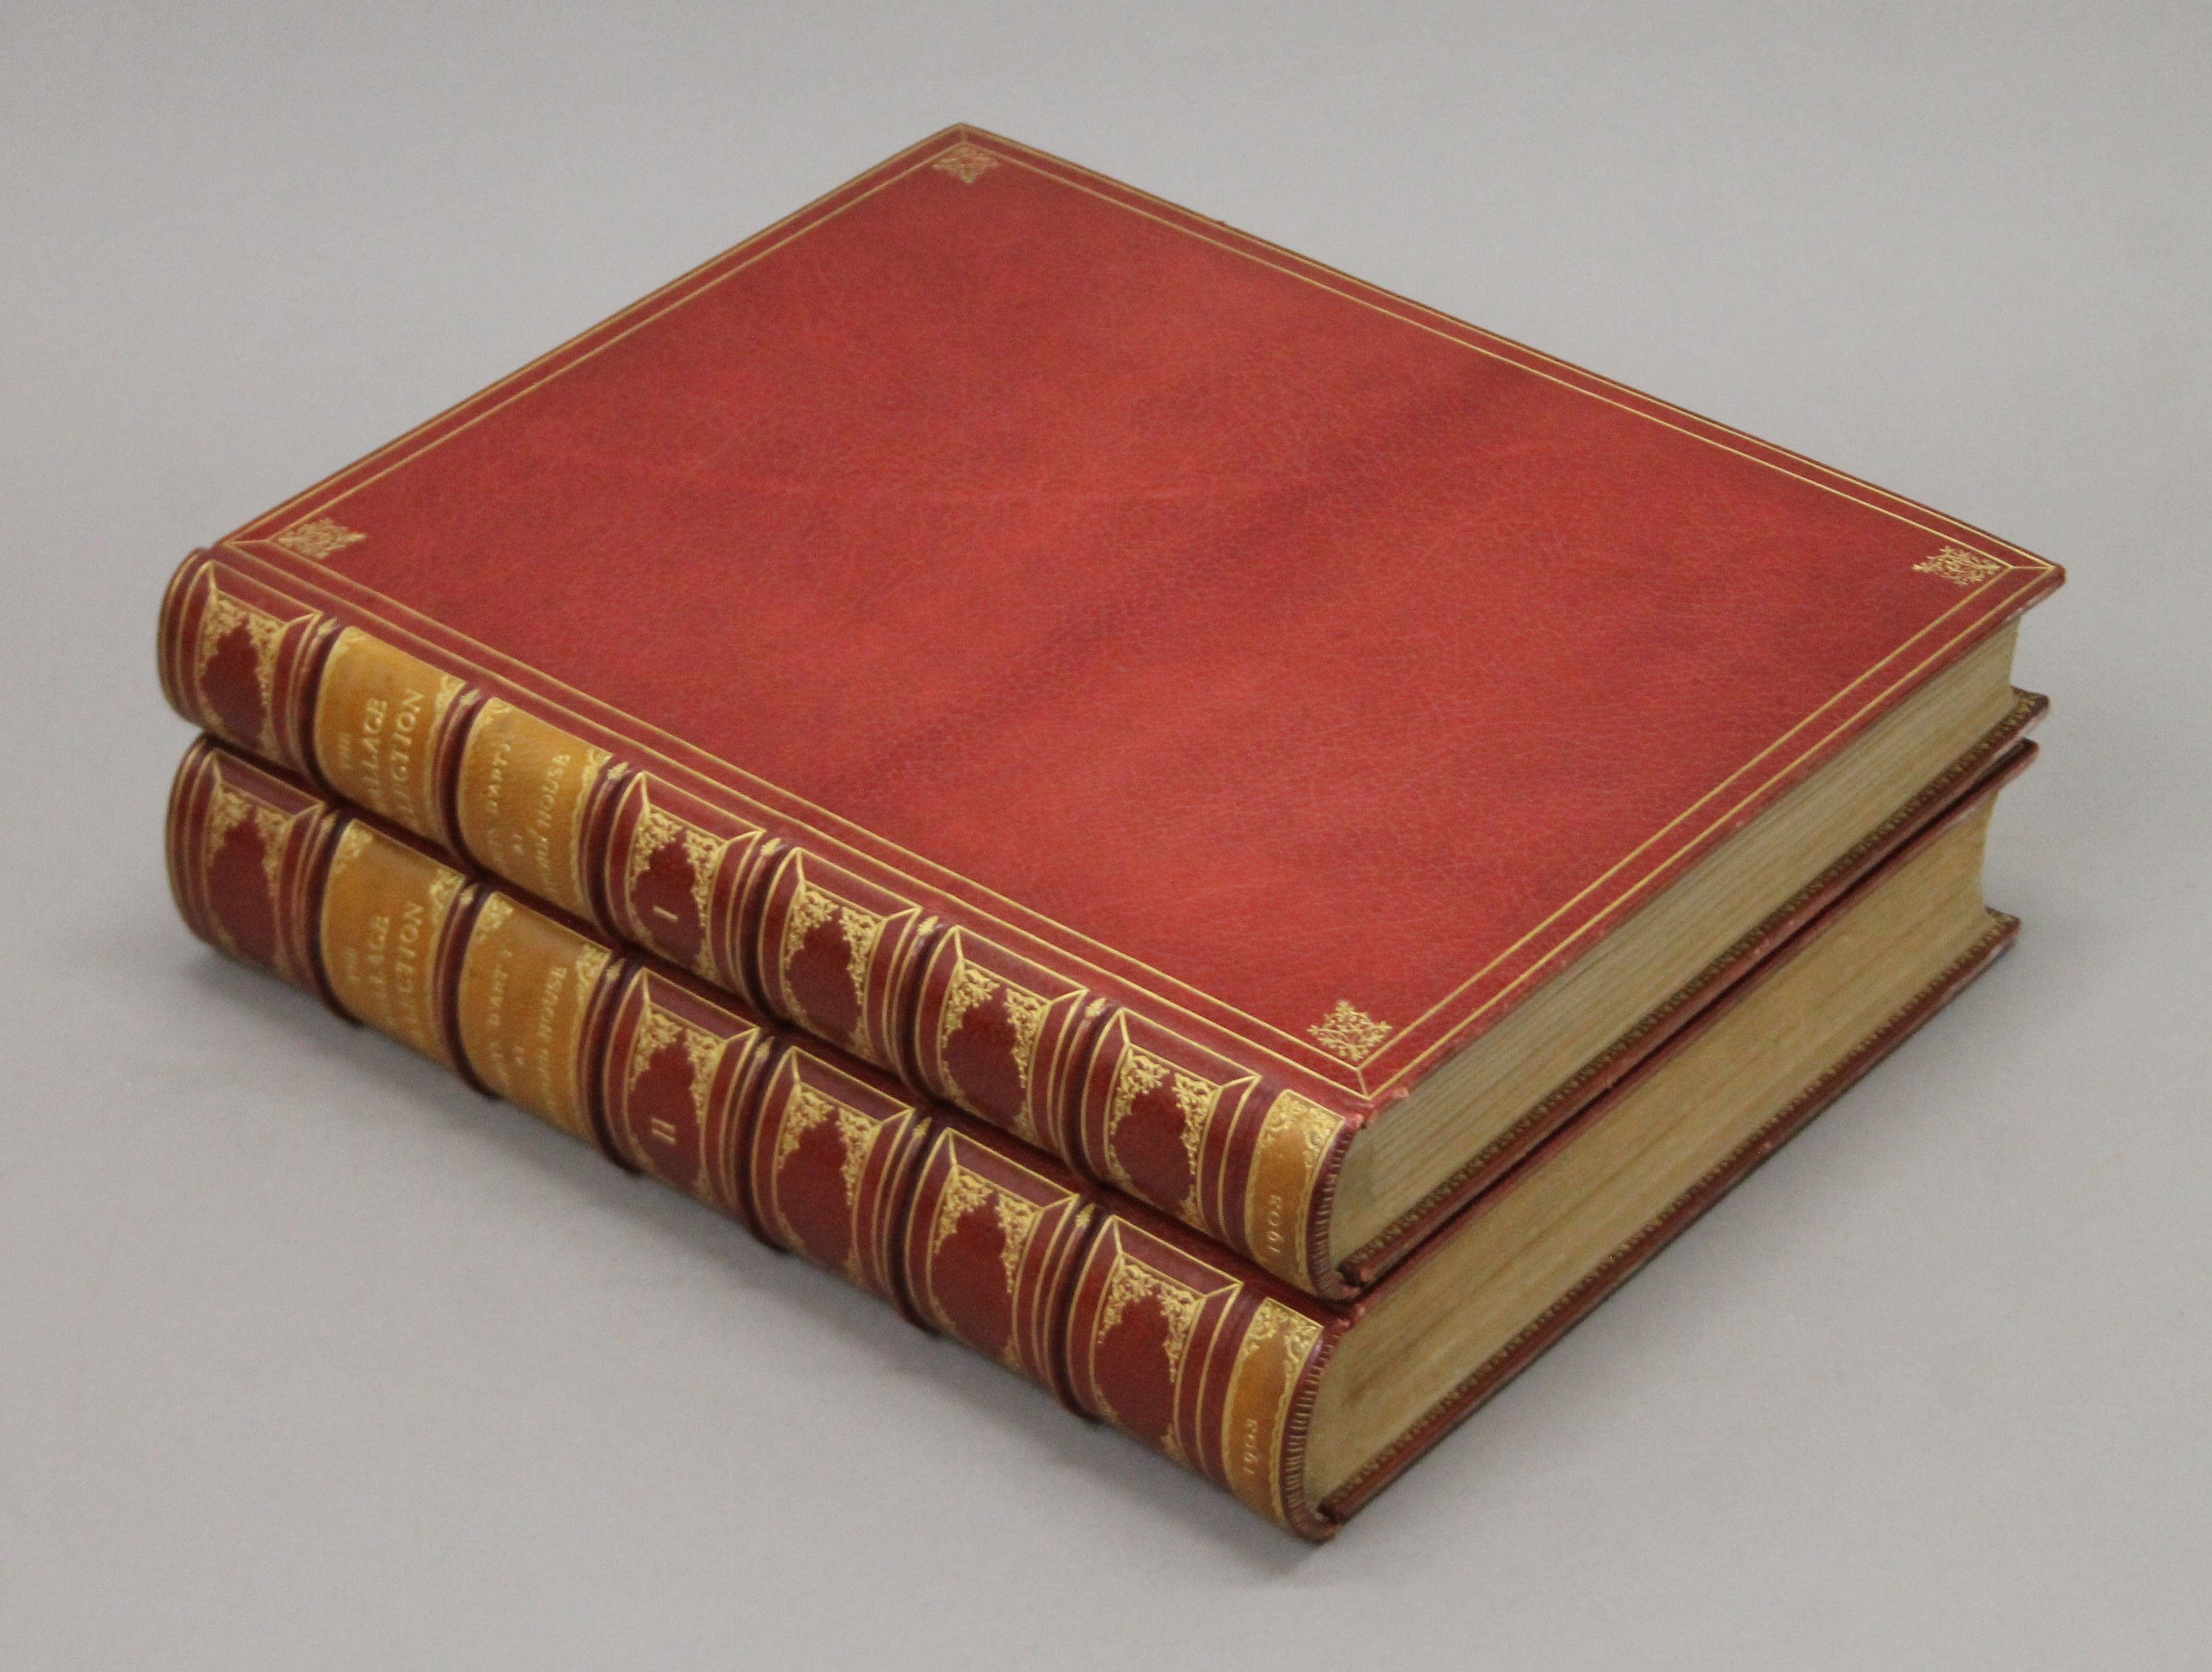 Molinier (Emile), The Wallace Collection (Object D'Art) at Hertford House, 2 vols,